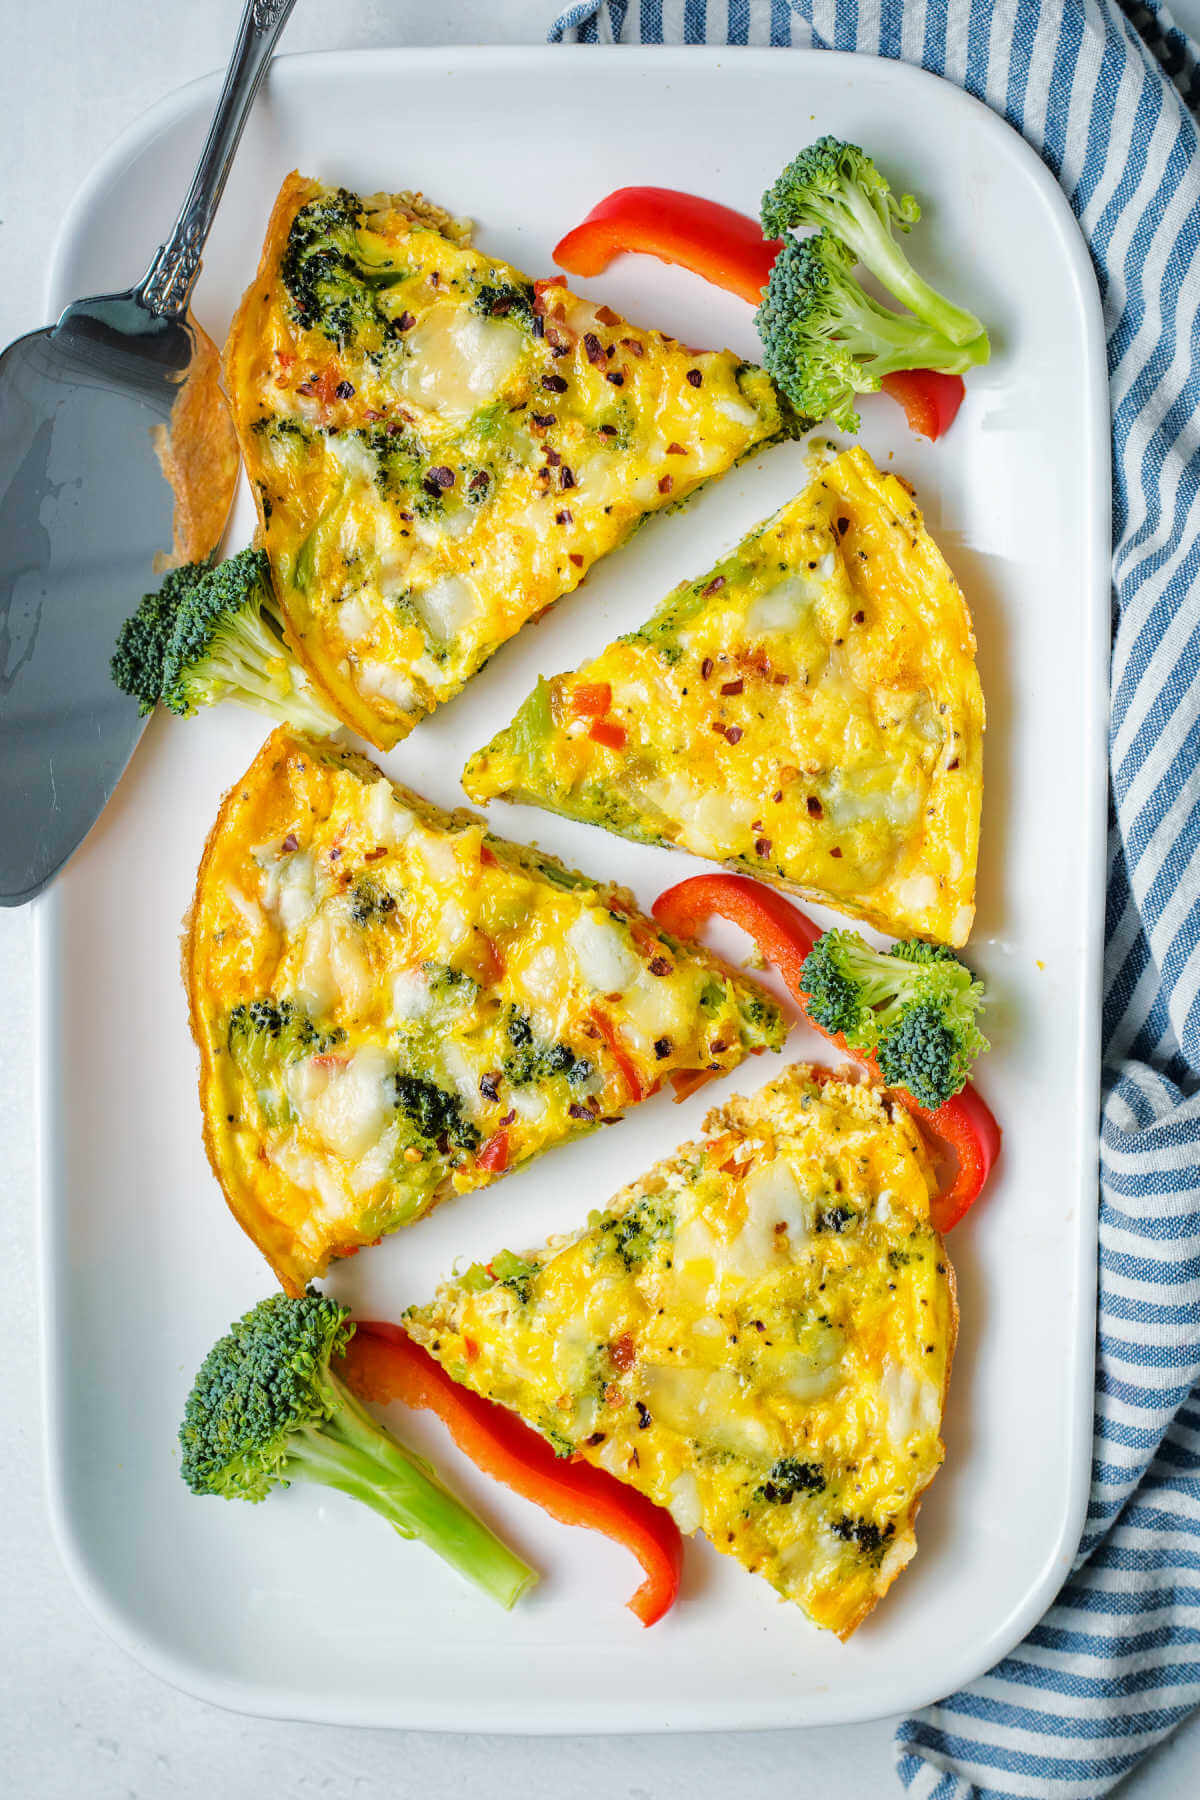 servings of vegetable frittata on a white platter garnished with broccoli florets and red bell pepper strips.